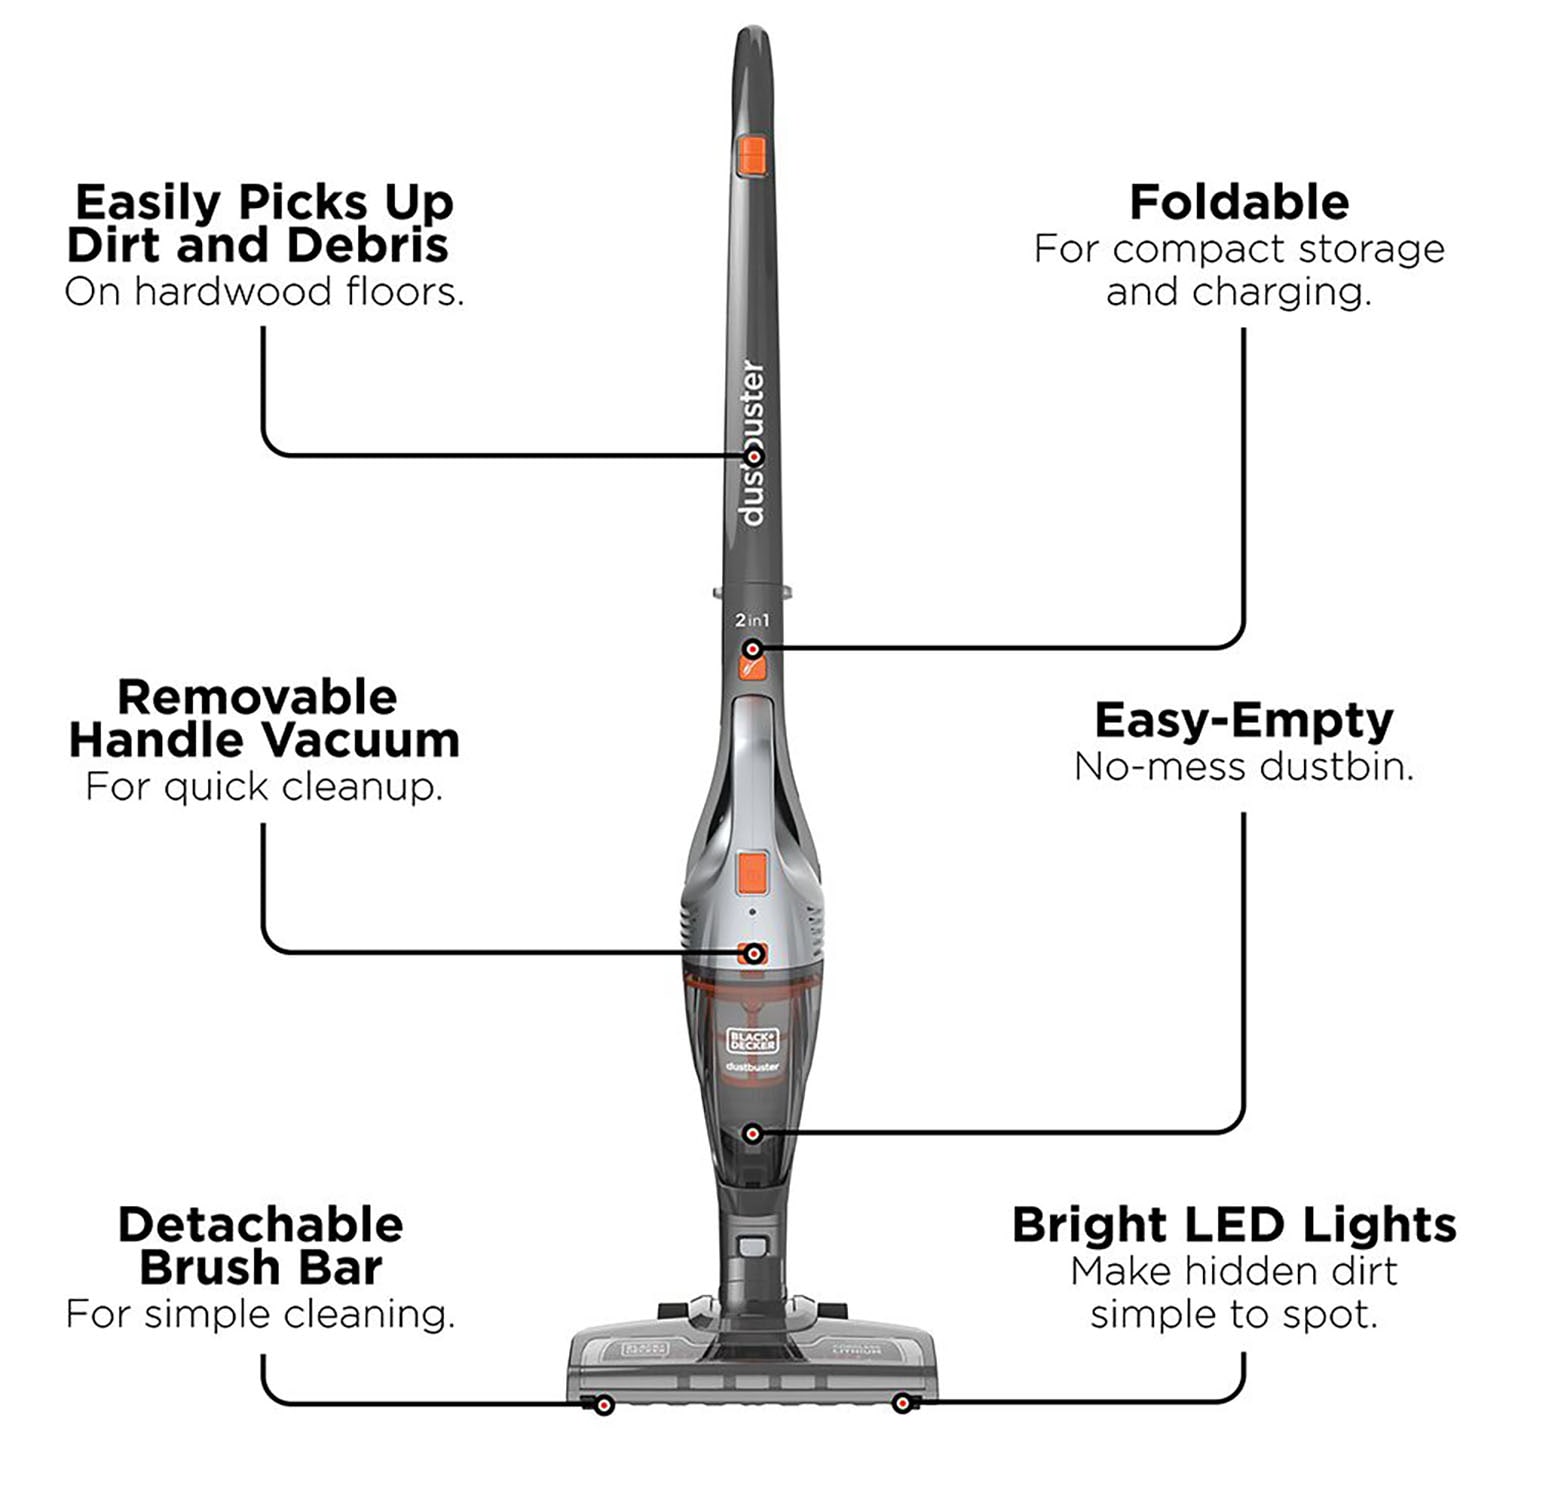 BLACK+DECKER Cordless Stick Vacuum Cleaner with Cyclonic